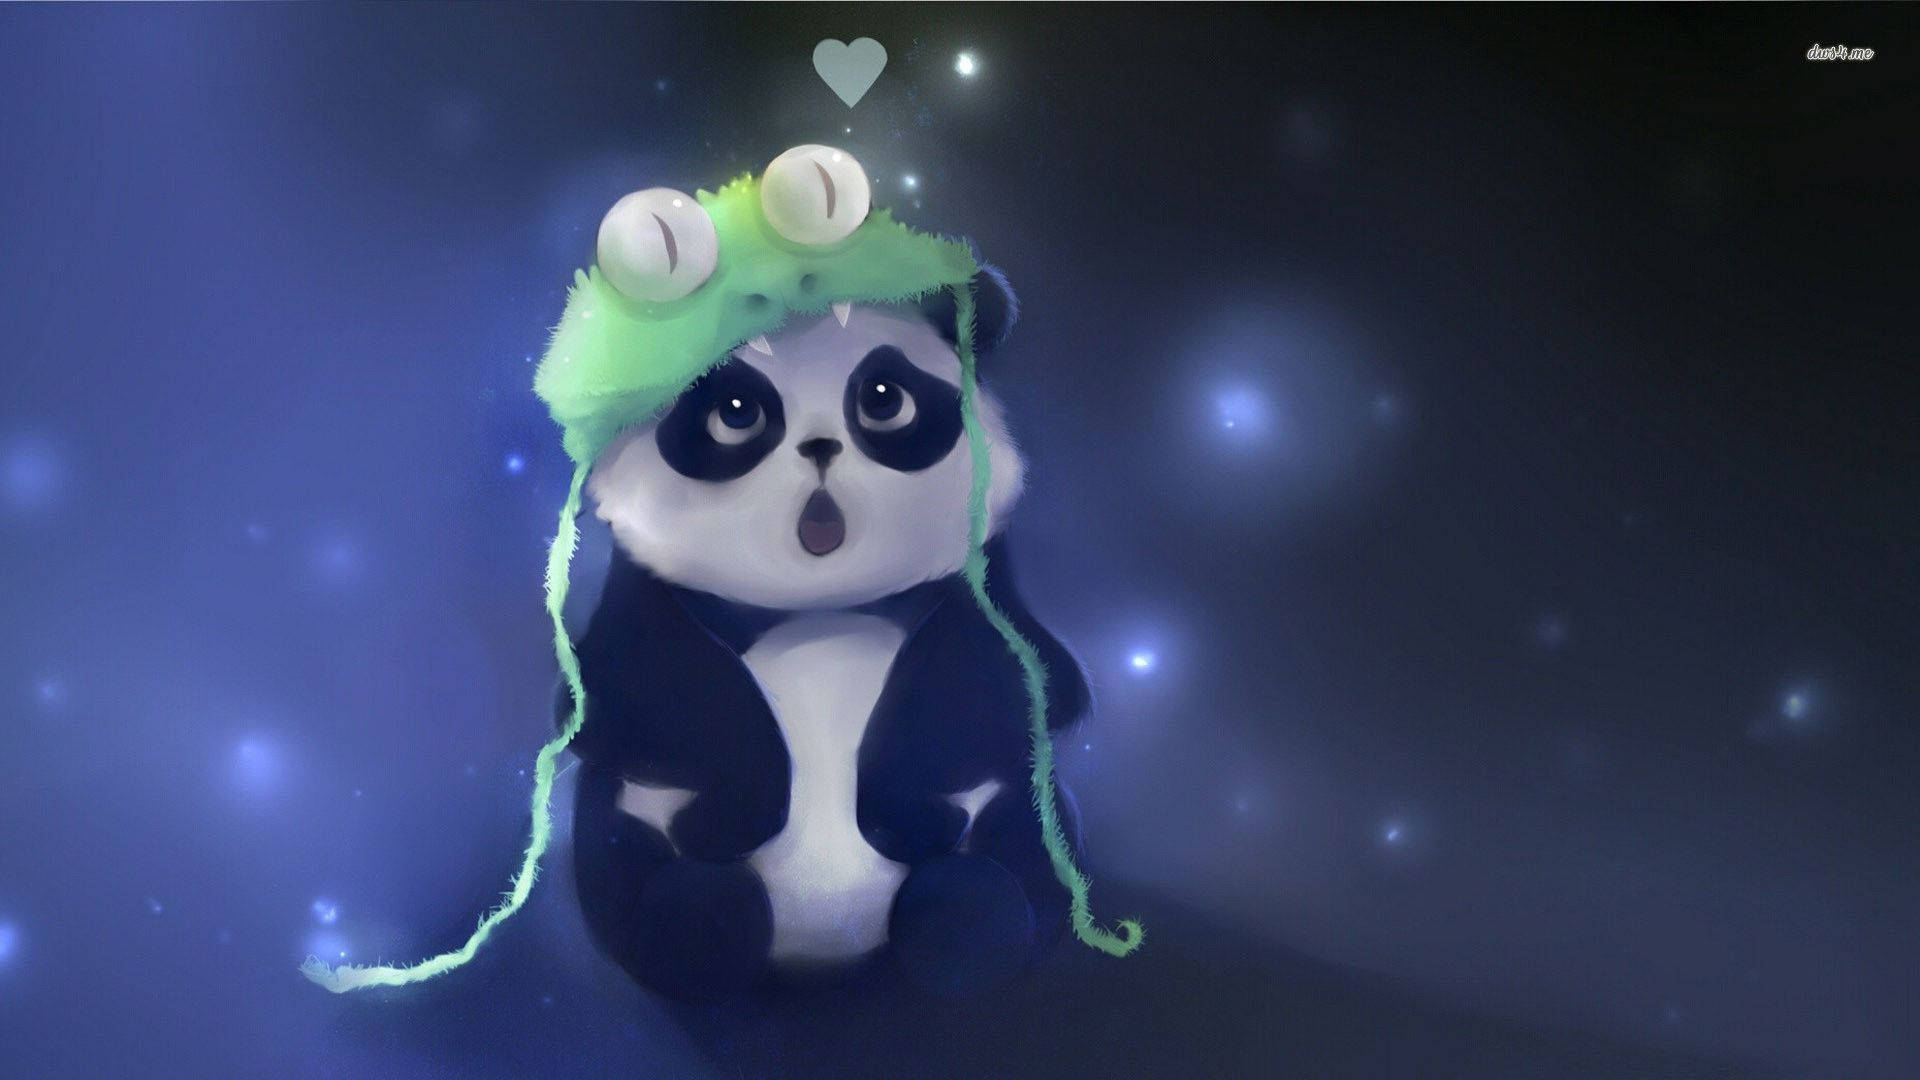 Cute Panda With Green Monster Hat Background